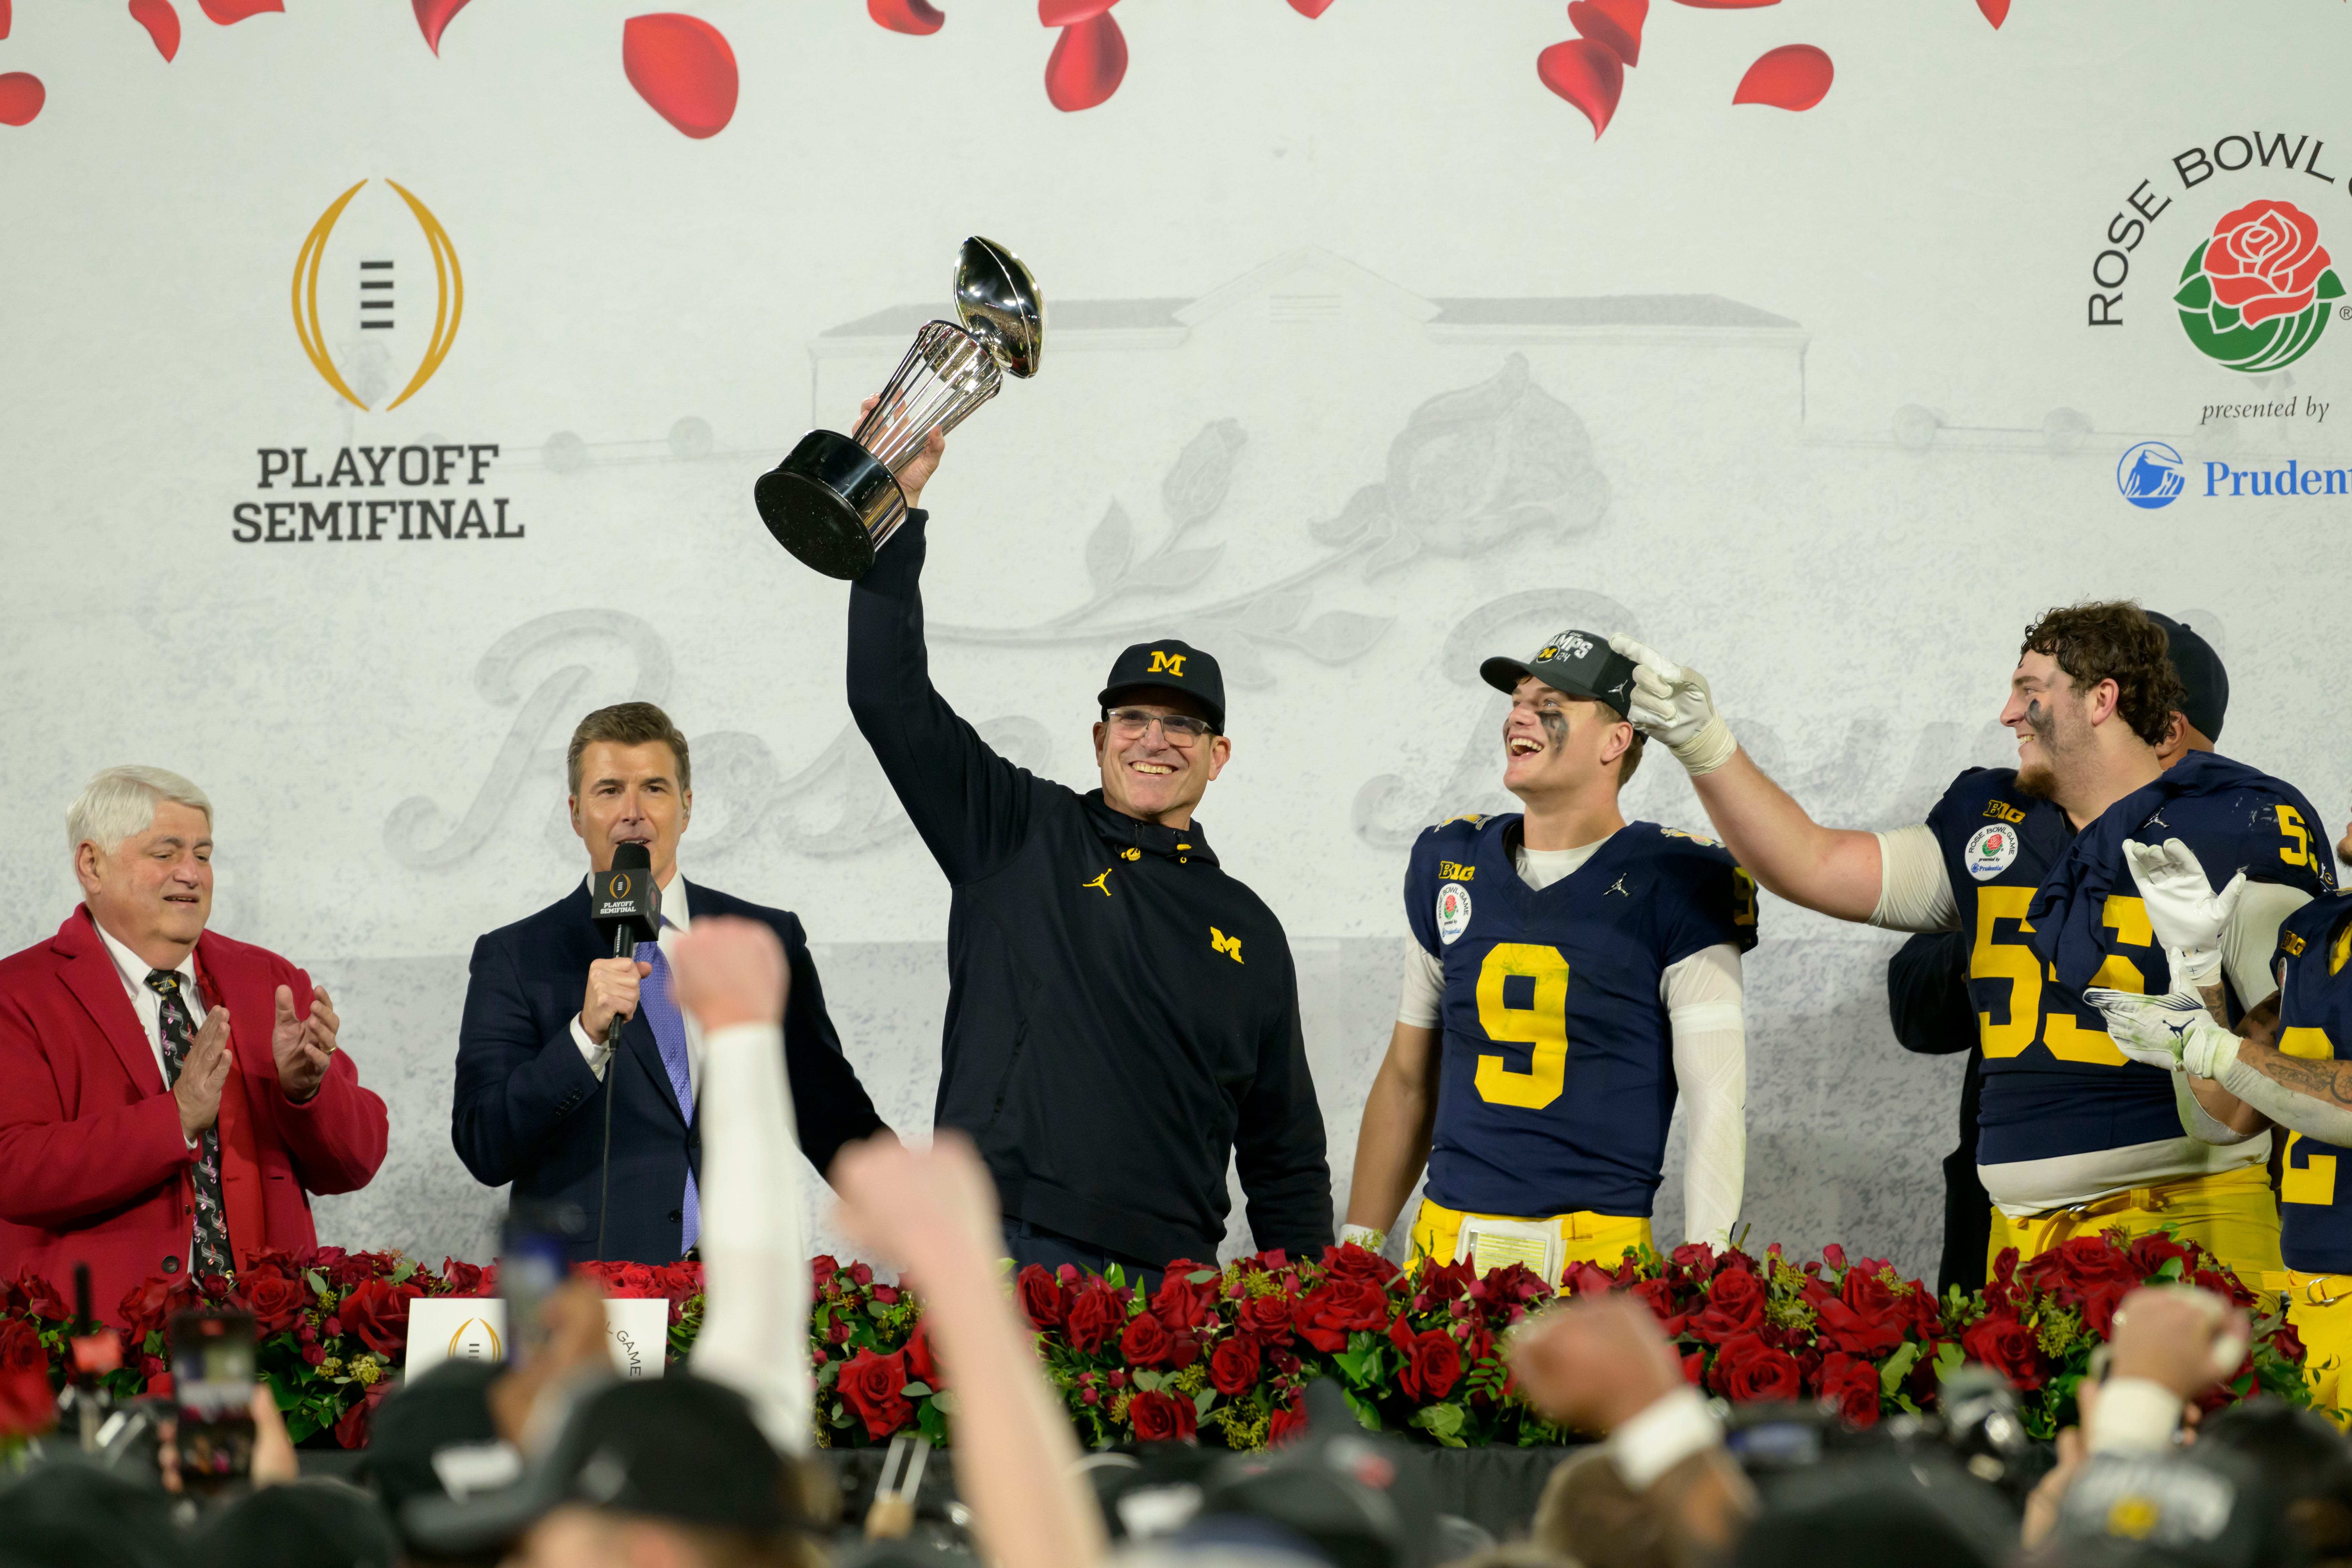 Michigan head coach Jim Harbaugh lifts the Leishman Trophy after the University of Michigan defeated Alabama University 27-20 in overtime at the Rose Bowl, in Pasadena, California, January 1, 2024.